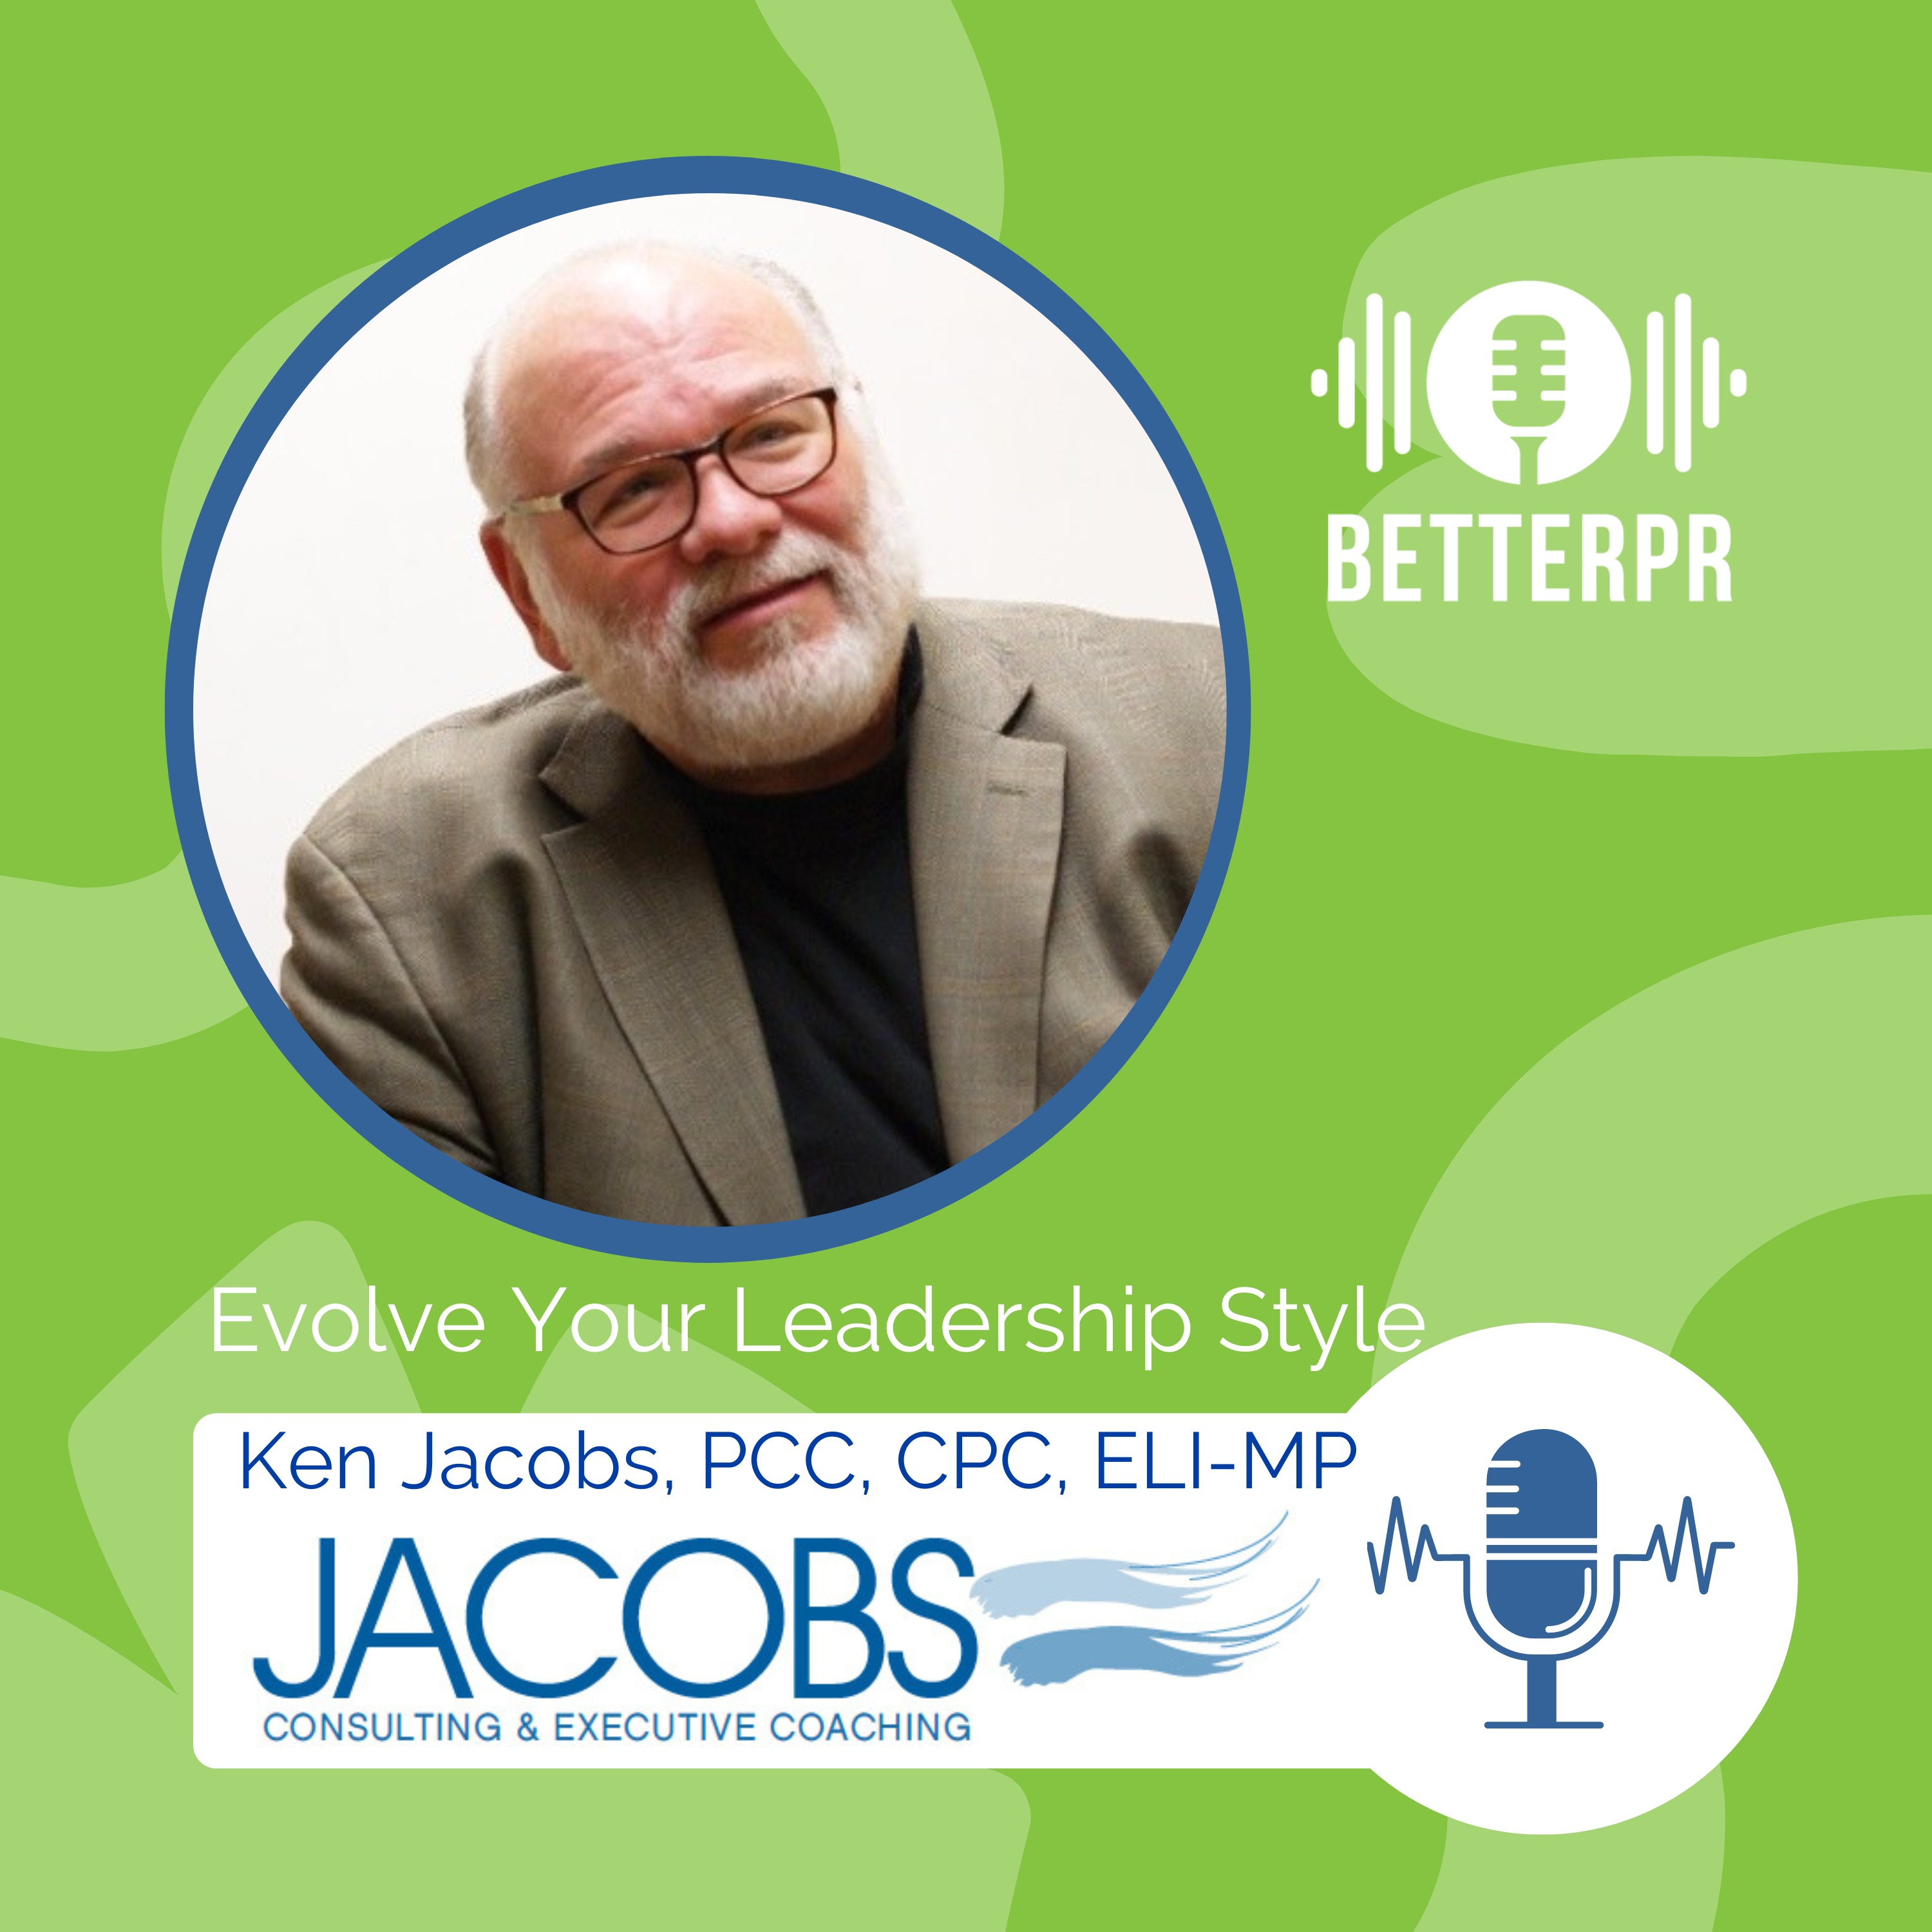 Ken Jabobs discusses how to Evolve as a Leader on the BetterPR podcast.